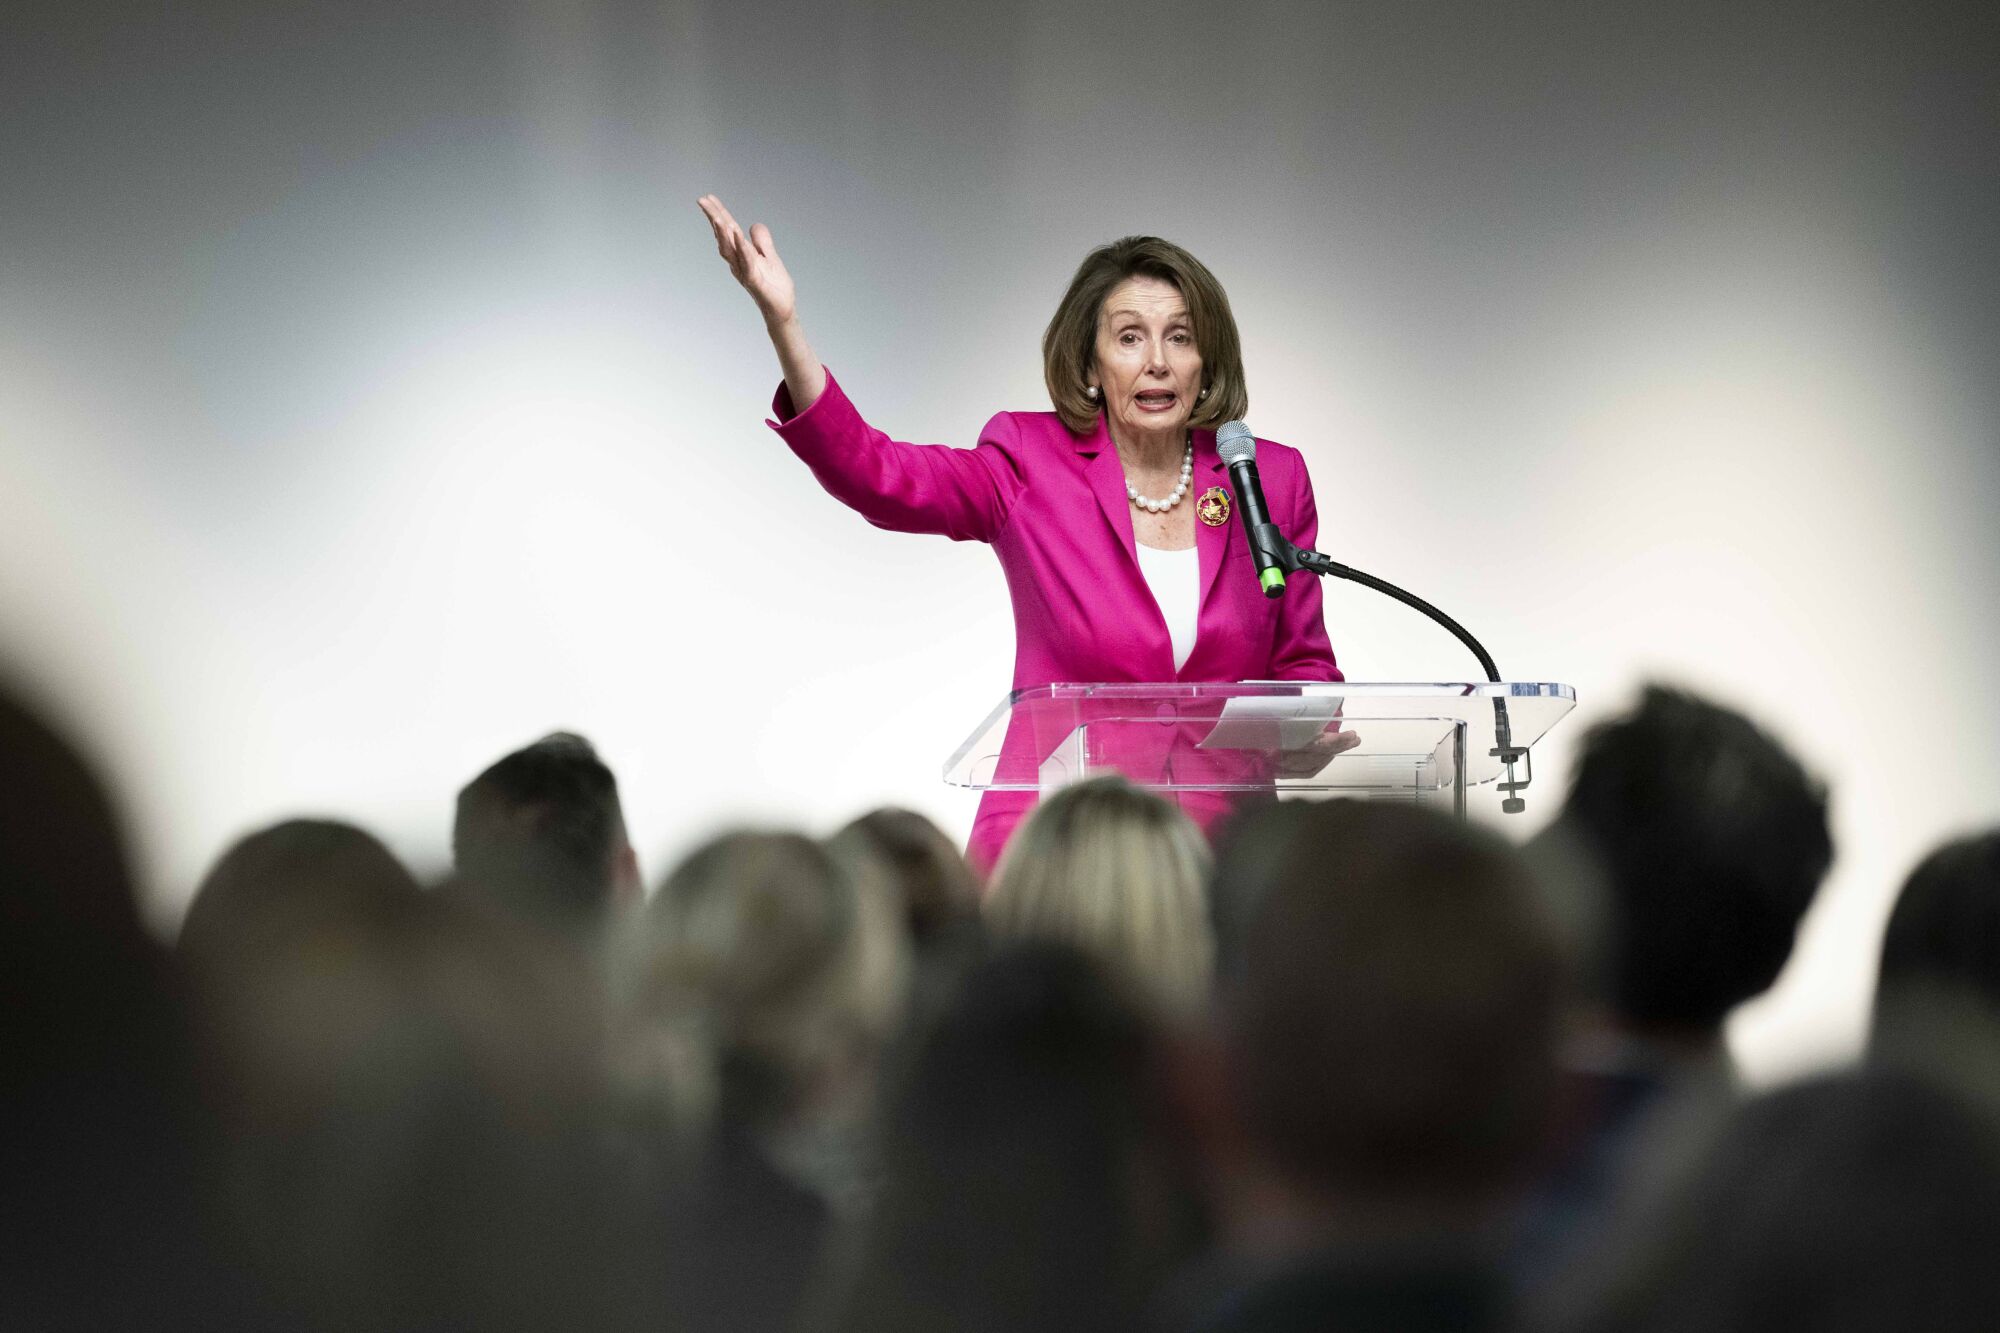 A woman gestures while speaking from a stage